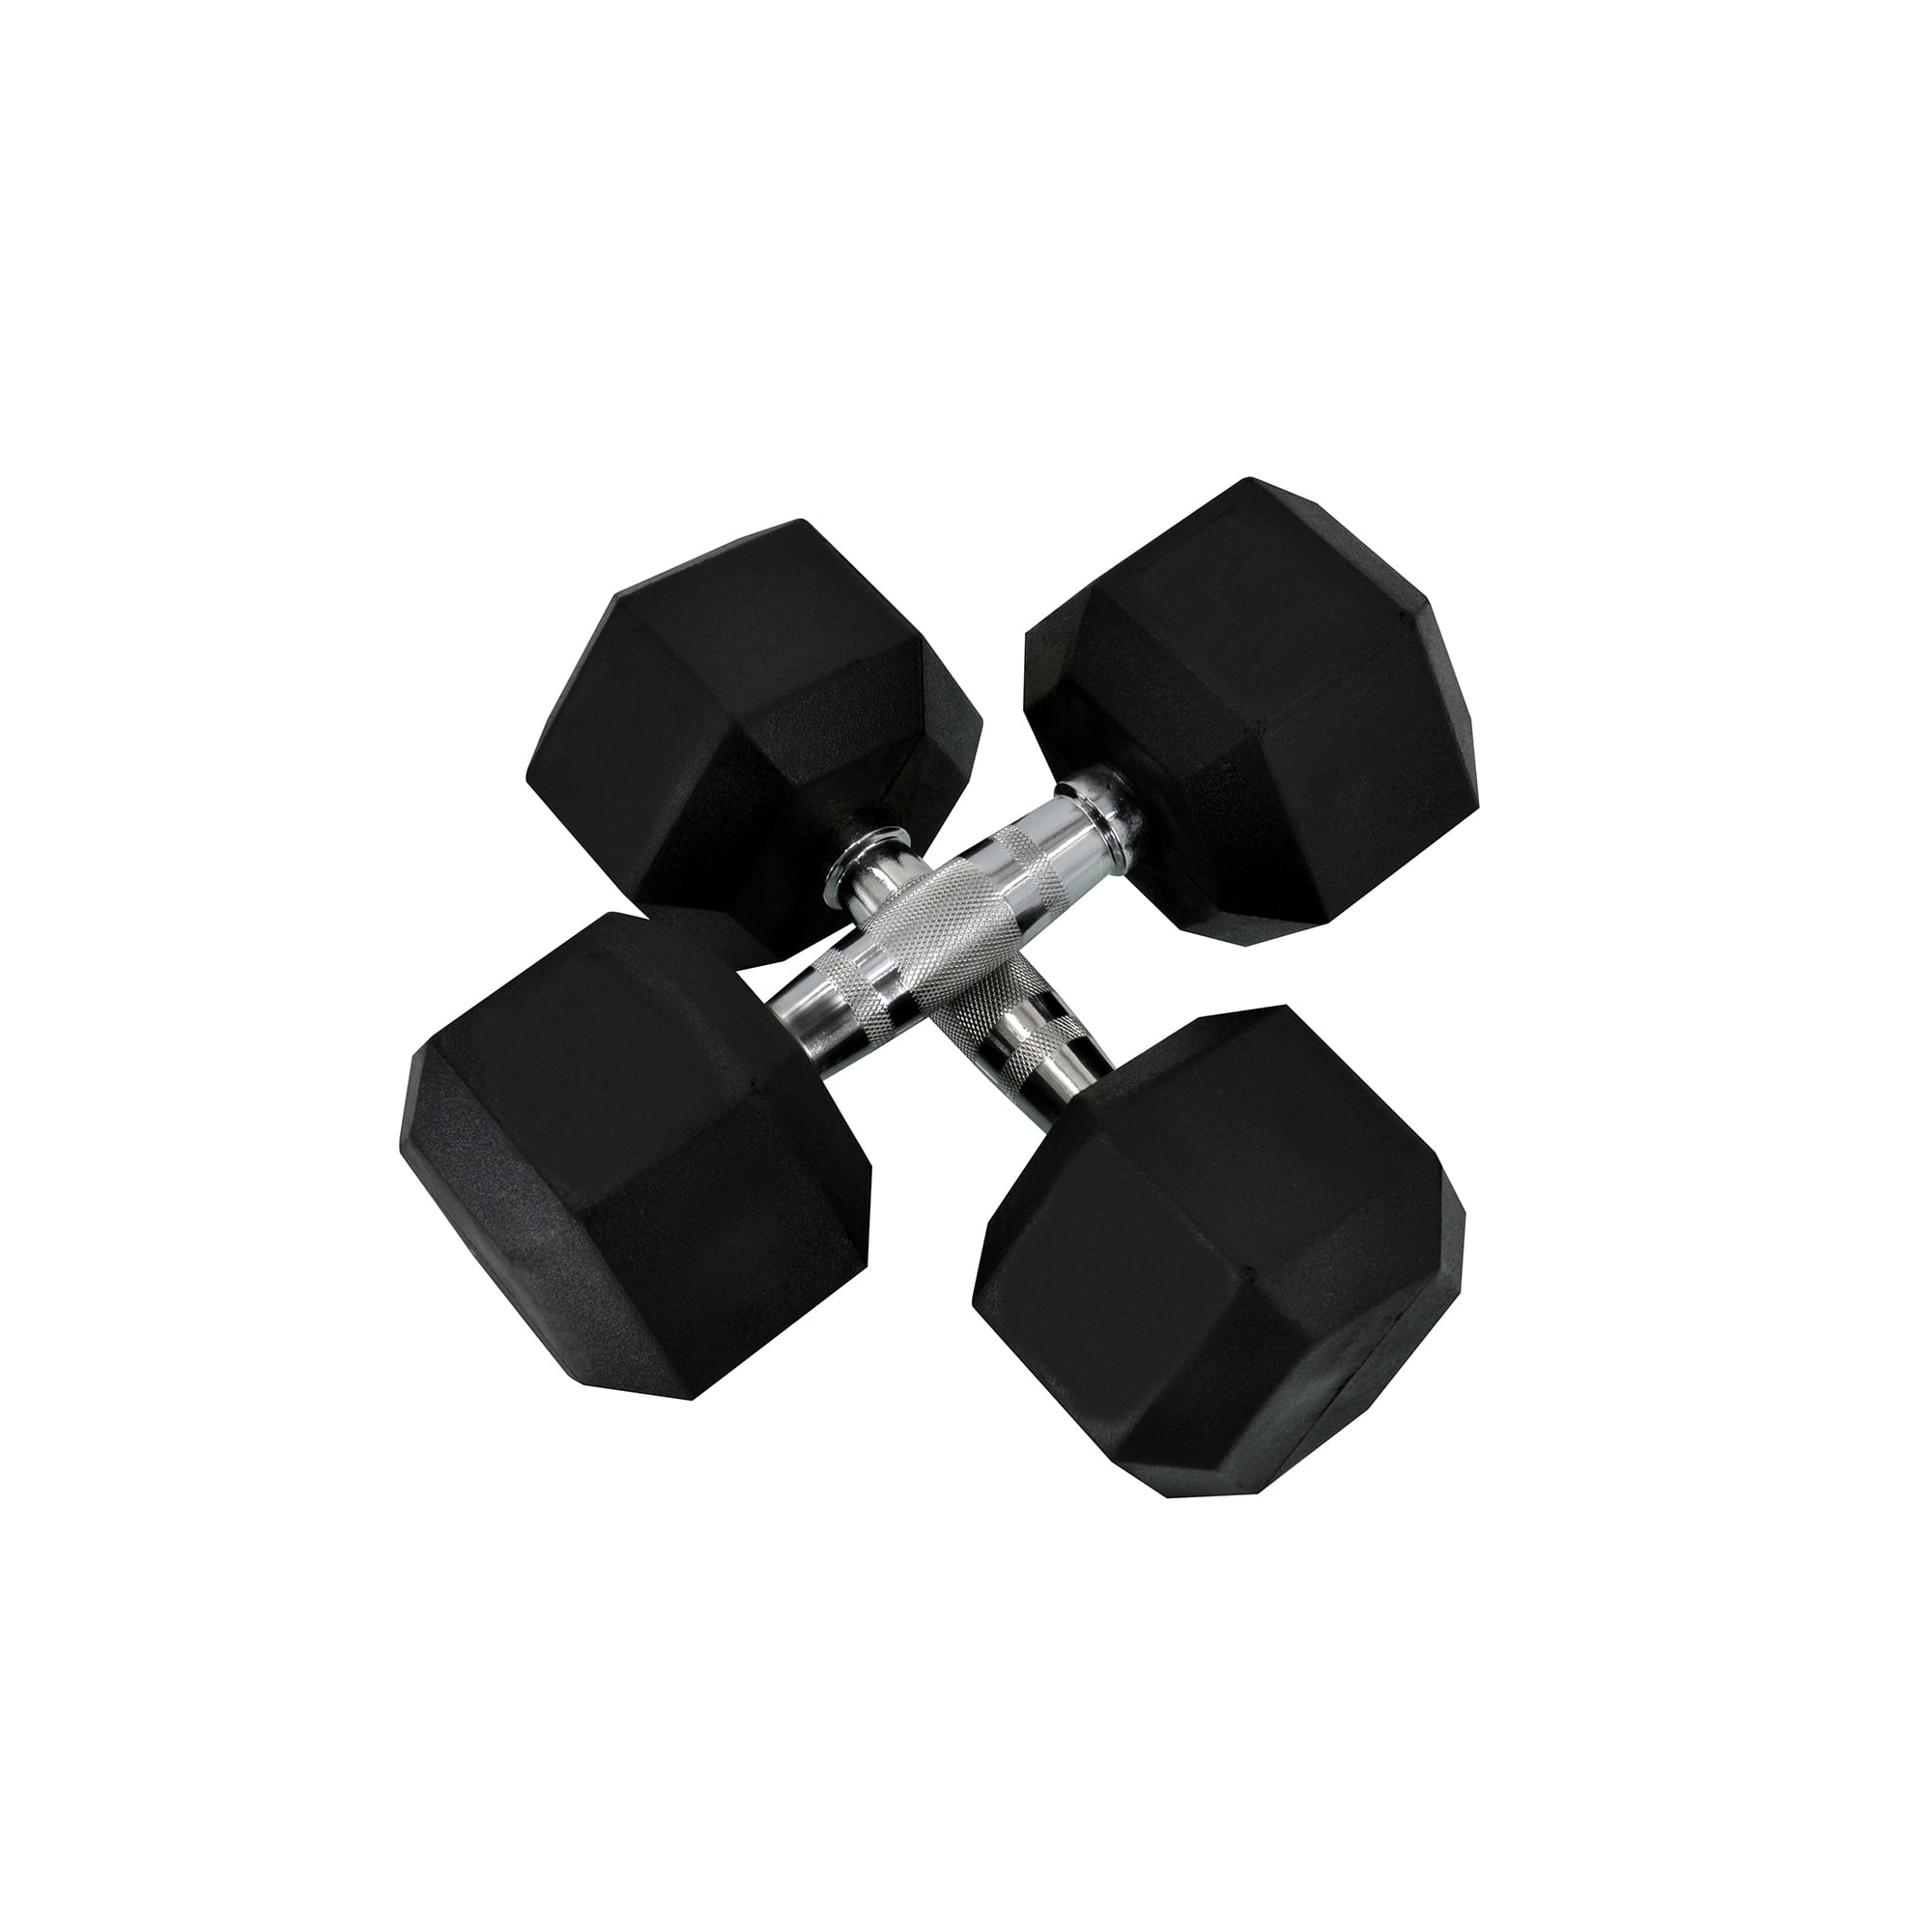 35 25 10 30 NEW CAP COATED RUBBER HEX DUMBBELLS select weight 15 20 40LB 